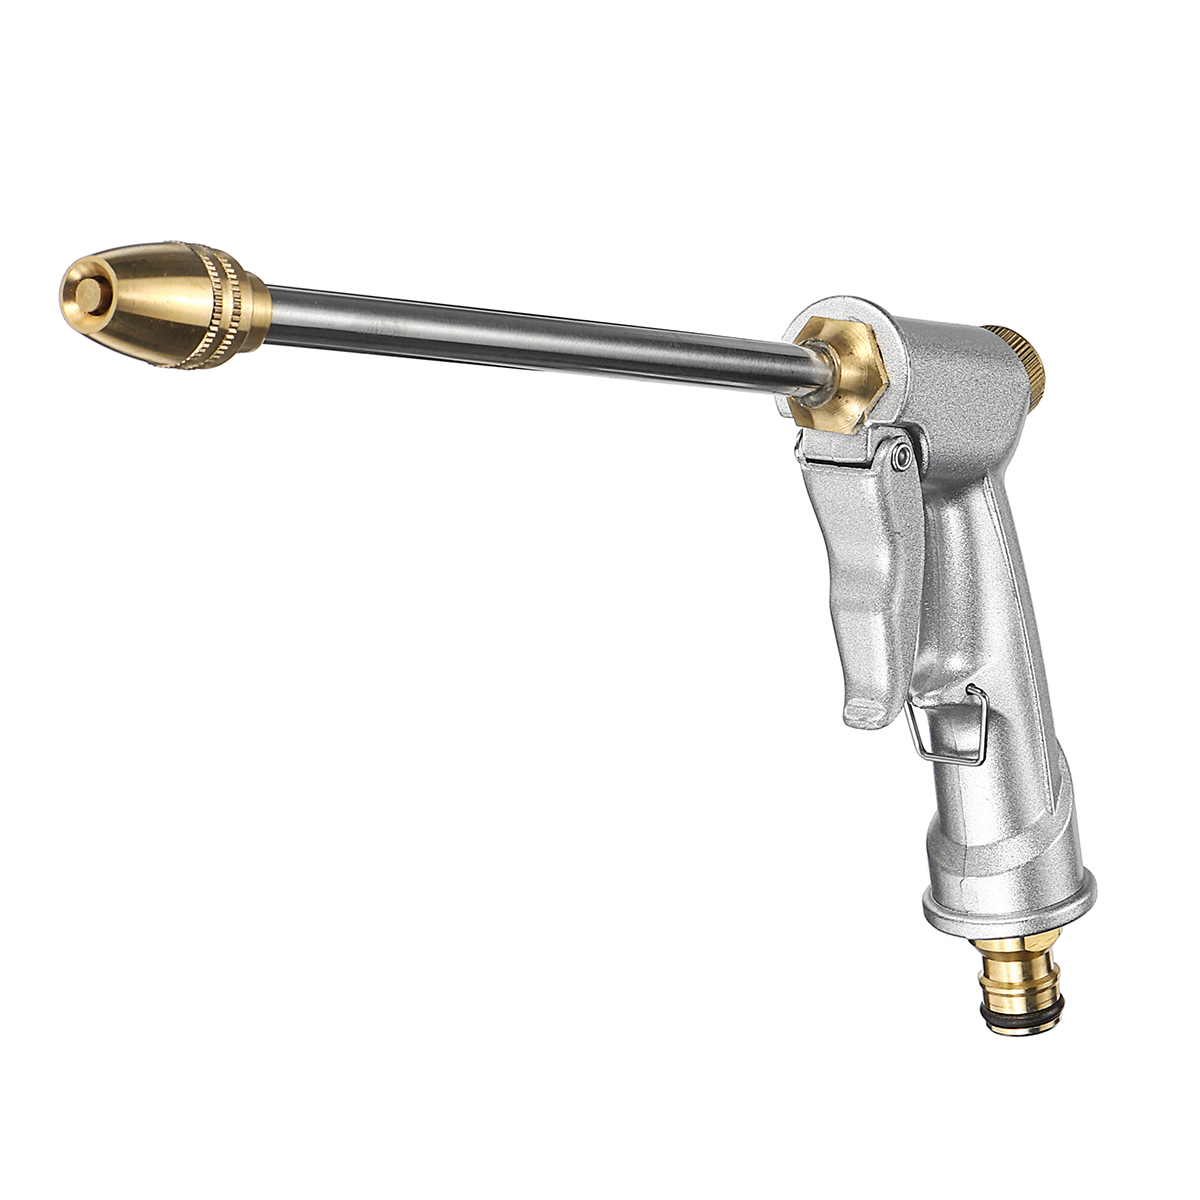 High-Pressure-Washer-Hose-Long-Rod-Nozzle-Metal-Water-Sprayer-Car-Washing-Garden-Watering-Flowers-To-1486899-3